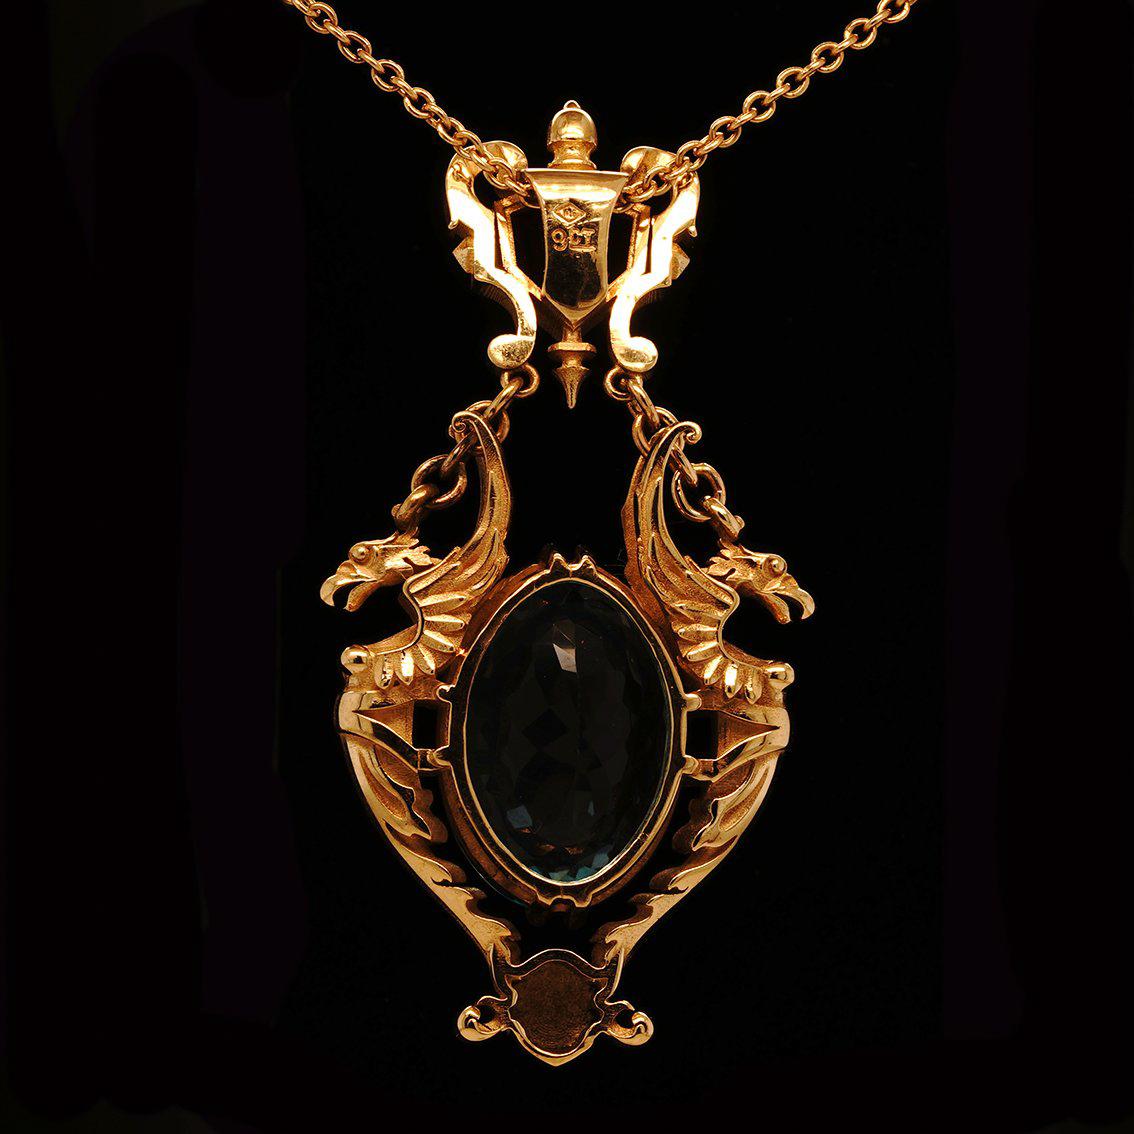 28ct Oval Swiss Blue Topaz, Garnet 9k Yellow Gold Antique Style Pendant Necklace For Sale 4